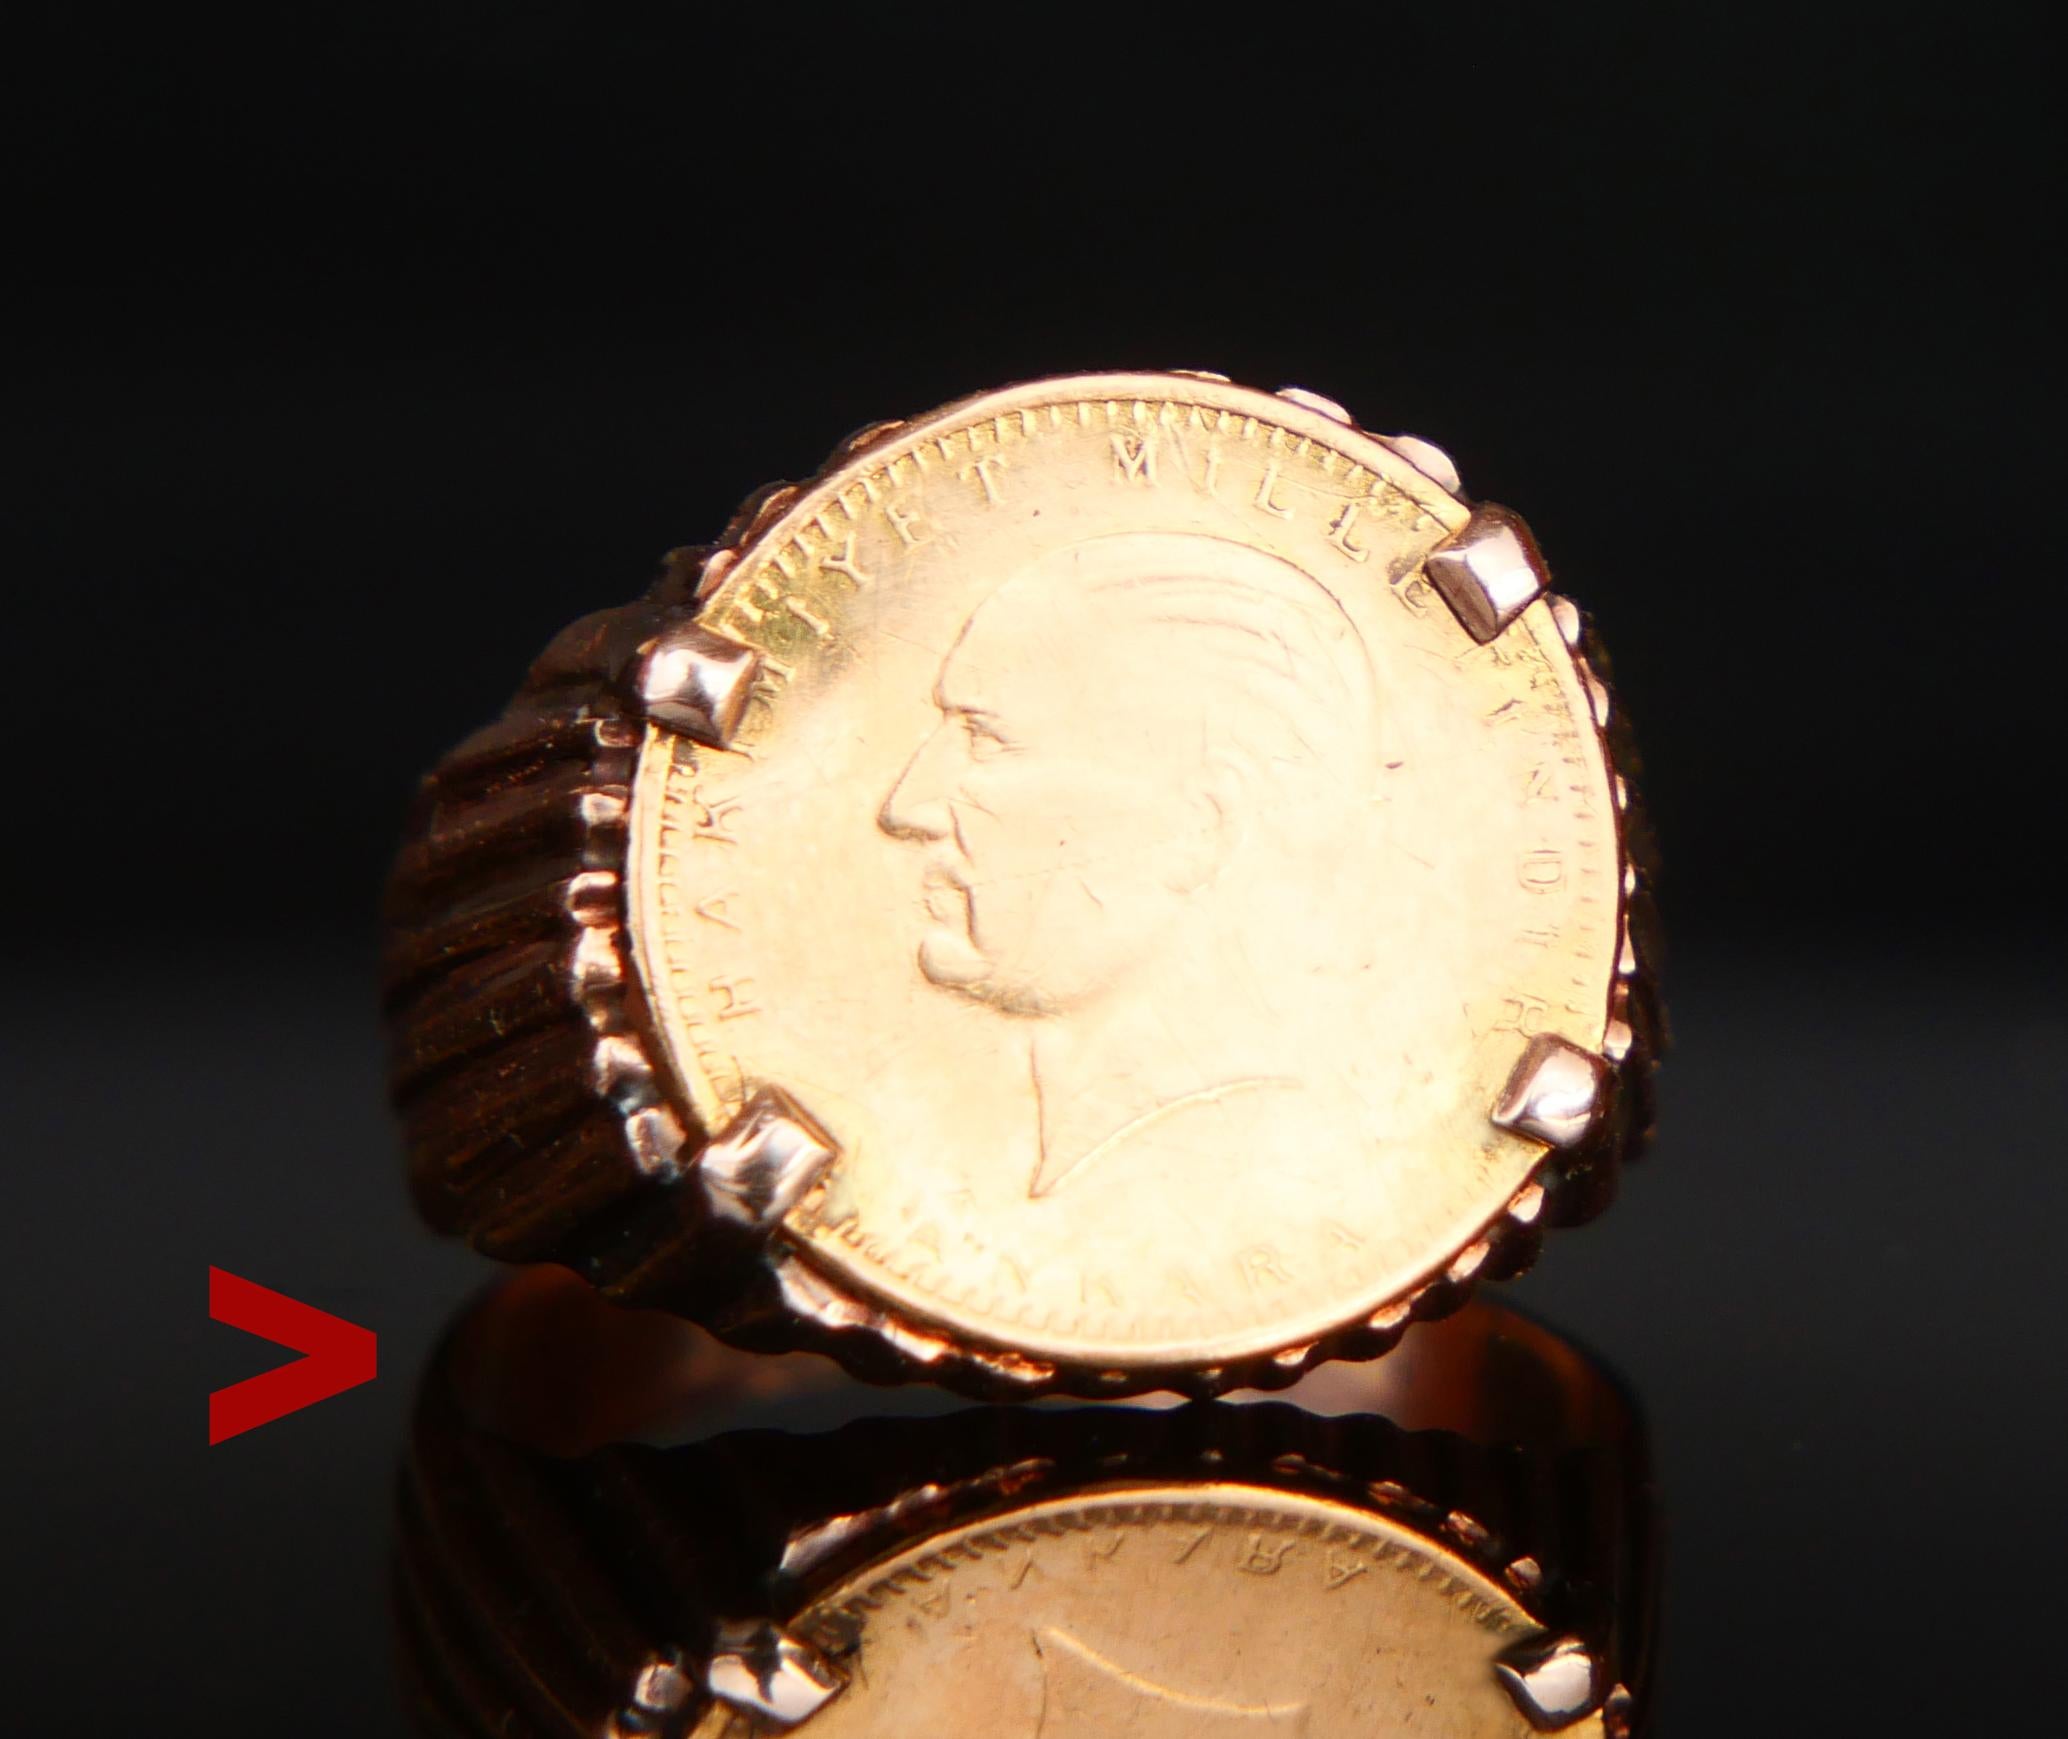 A ring with Turkish Coin.

Solid 14k Rose Gold band featuring bezel set genuine Turkish solid Ø14mm 22K Yellow Gold 25 Kurush coin minted in 1969.

The face of the coin bears the profile image of Mustafa Kemal Ataturk, who was the first president of